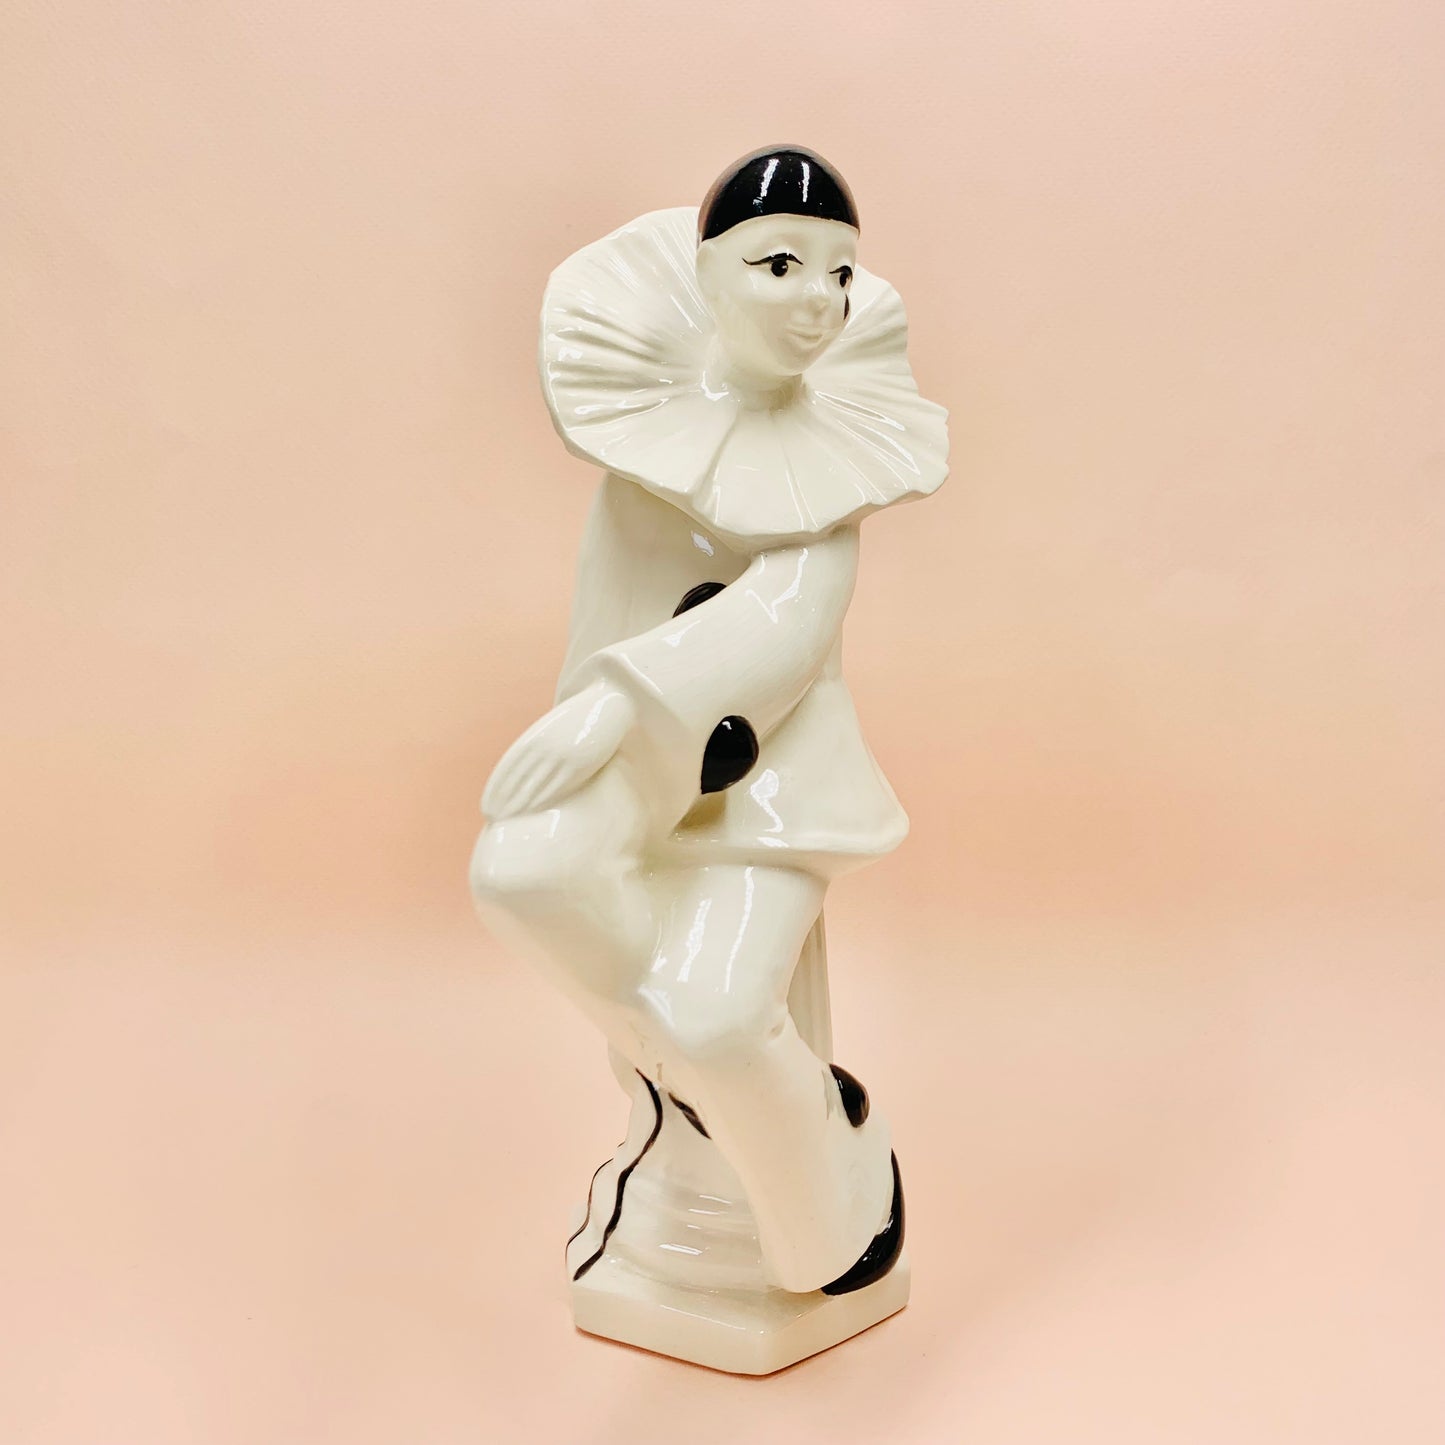 1980s white and black porcelain pantomime figurine